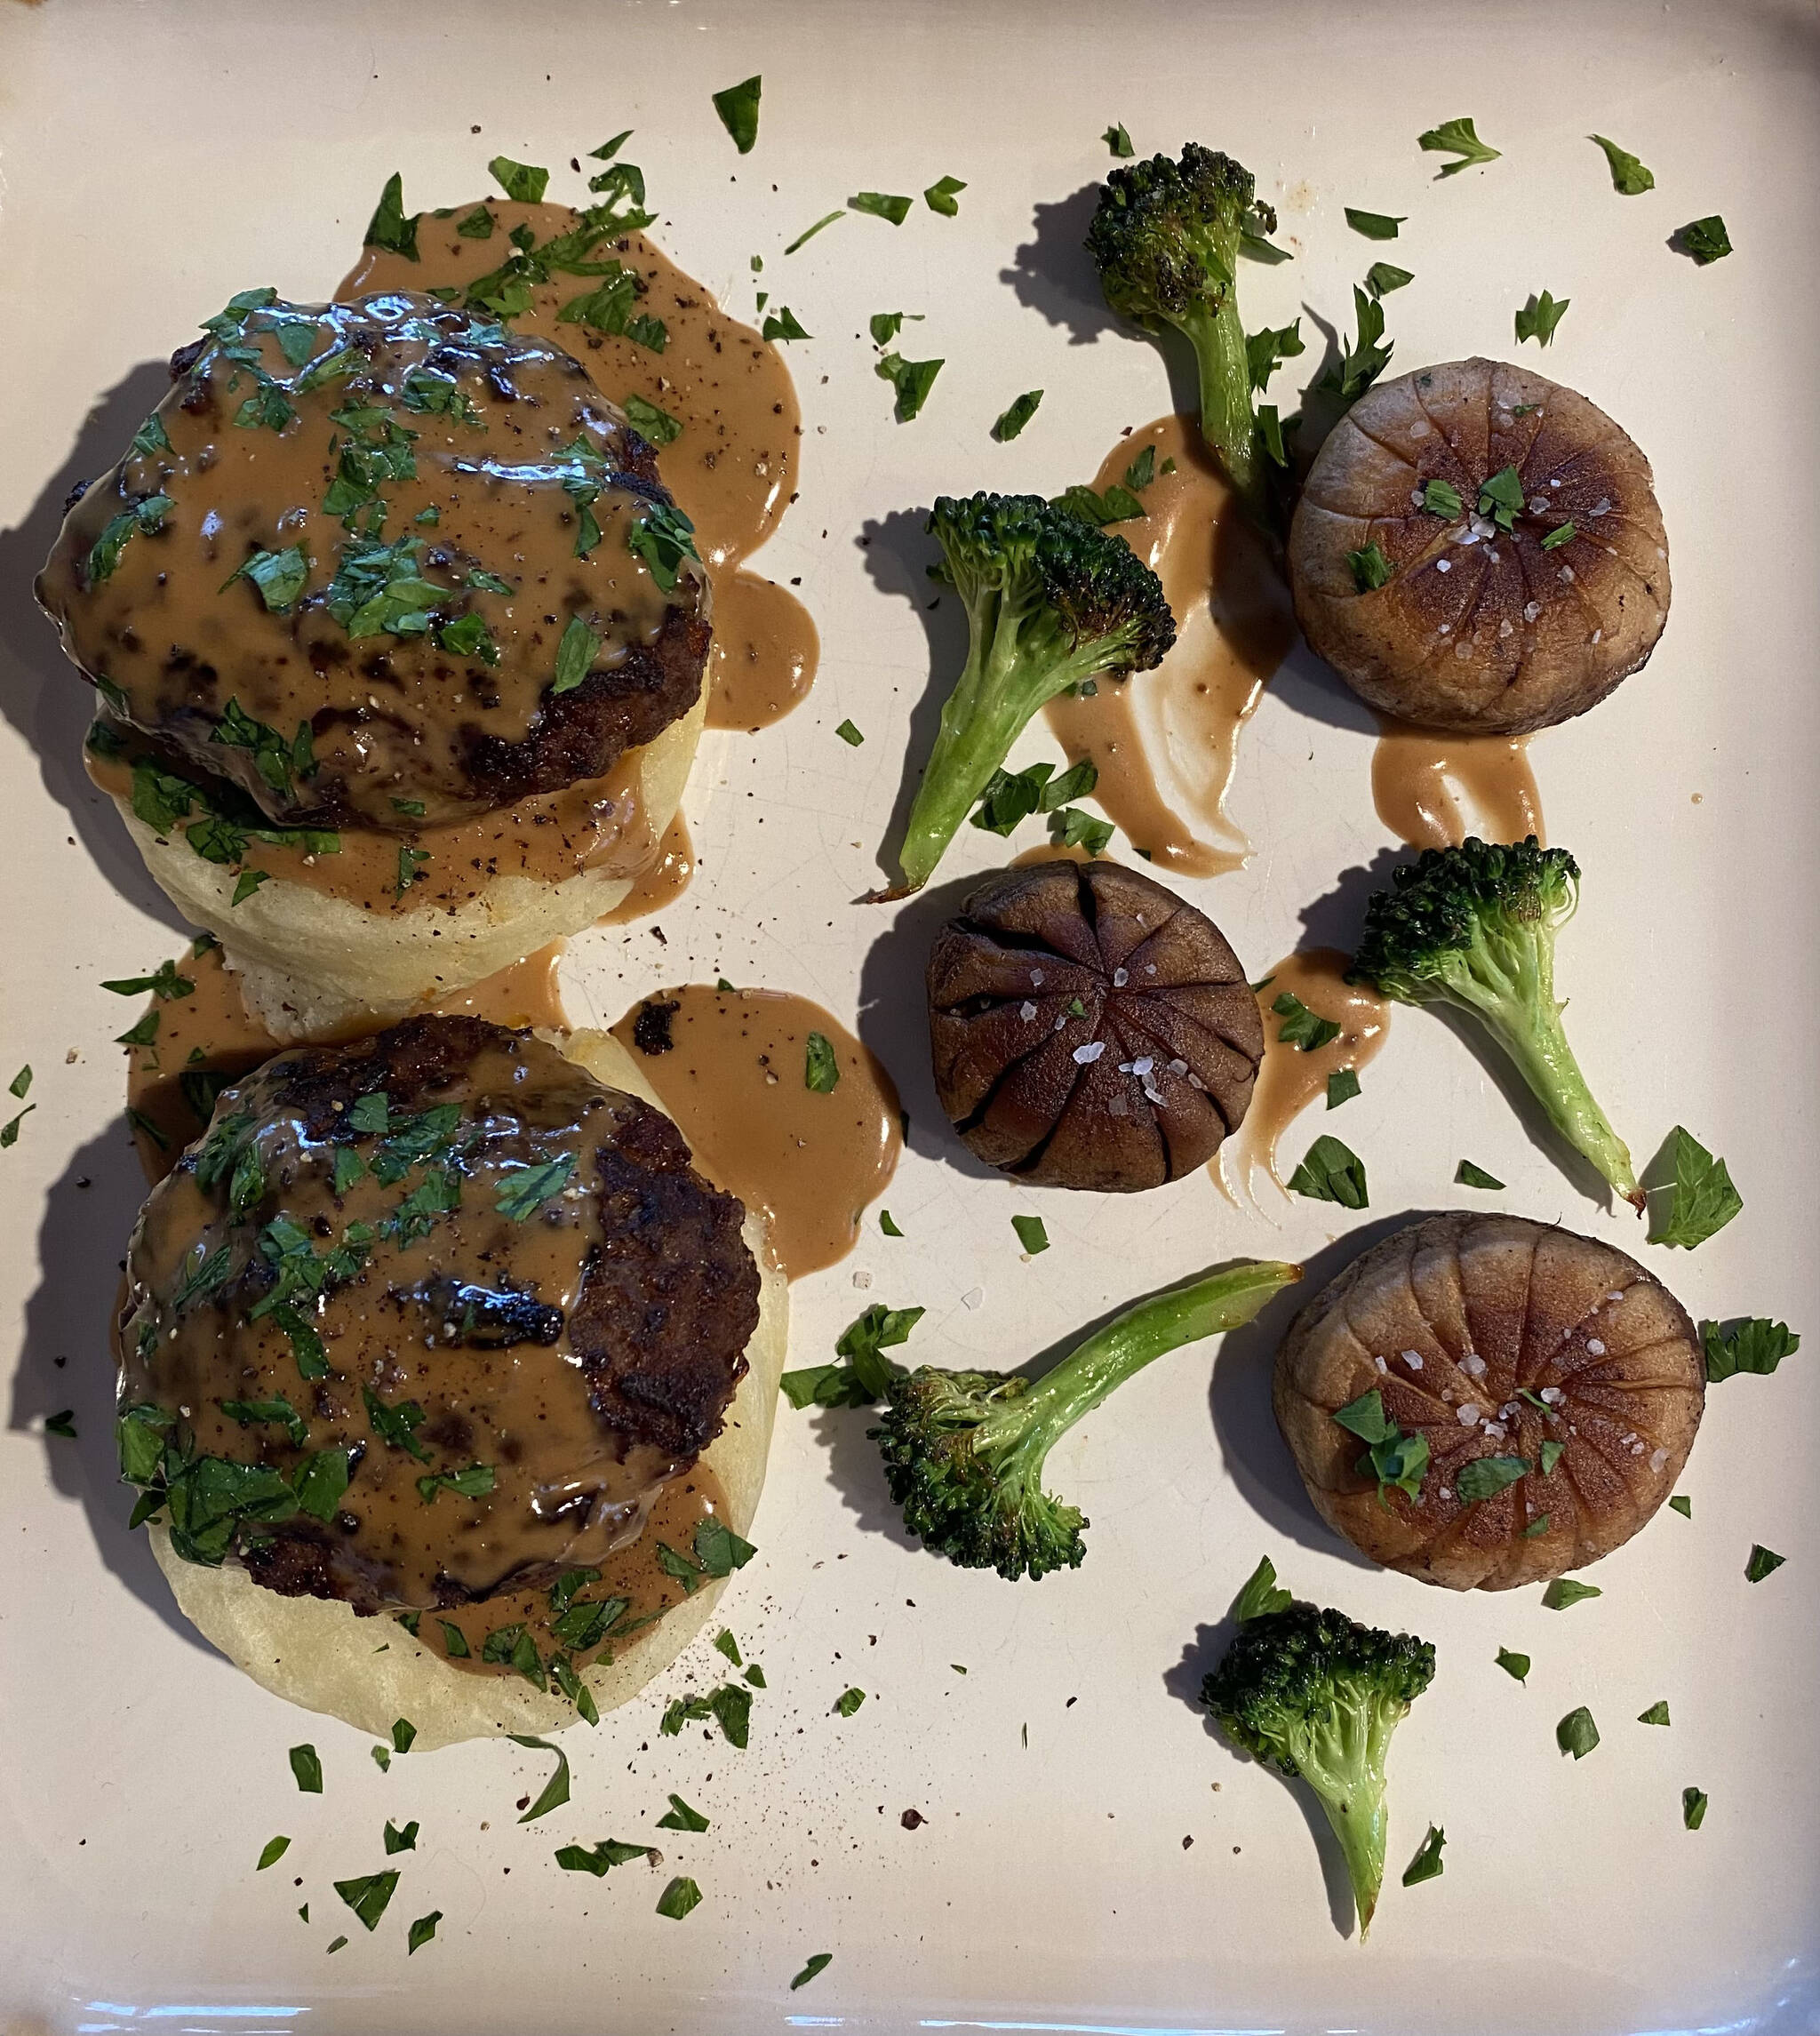 Salisbury steak, a classic of American cuisine, is served with mushrooms and broccoli. (Photo by Tressa Dale/Peninsula Clarion)